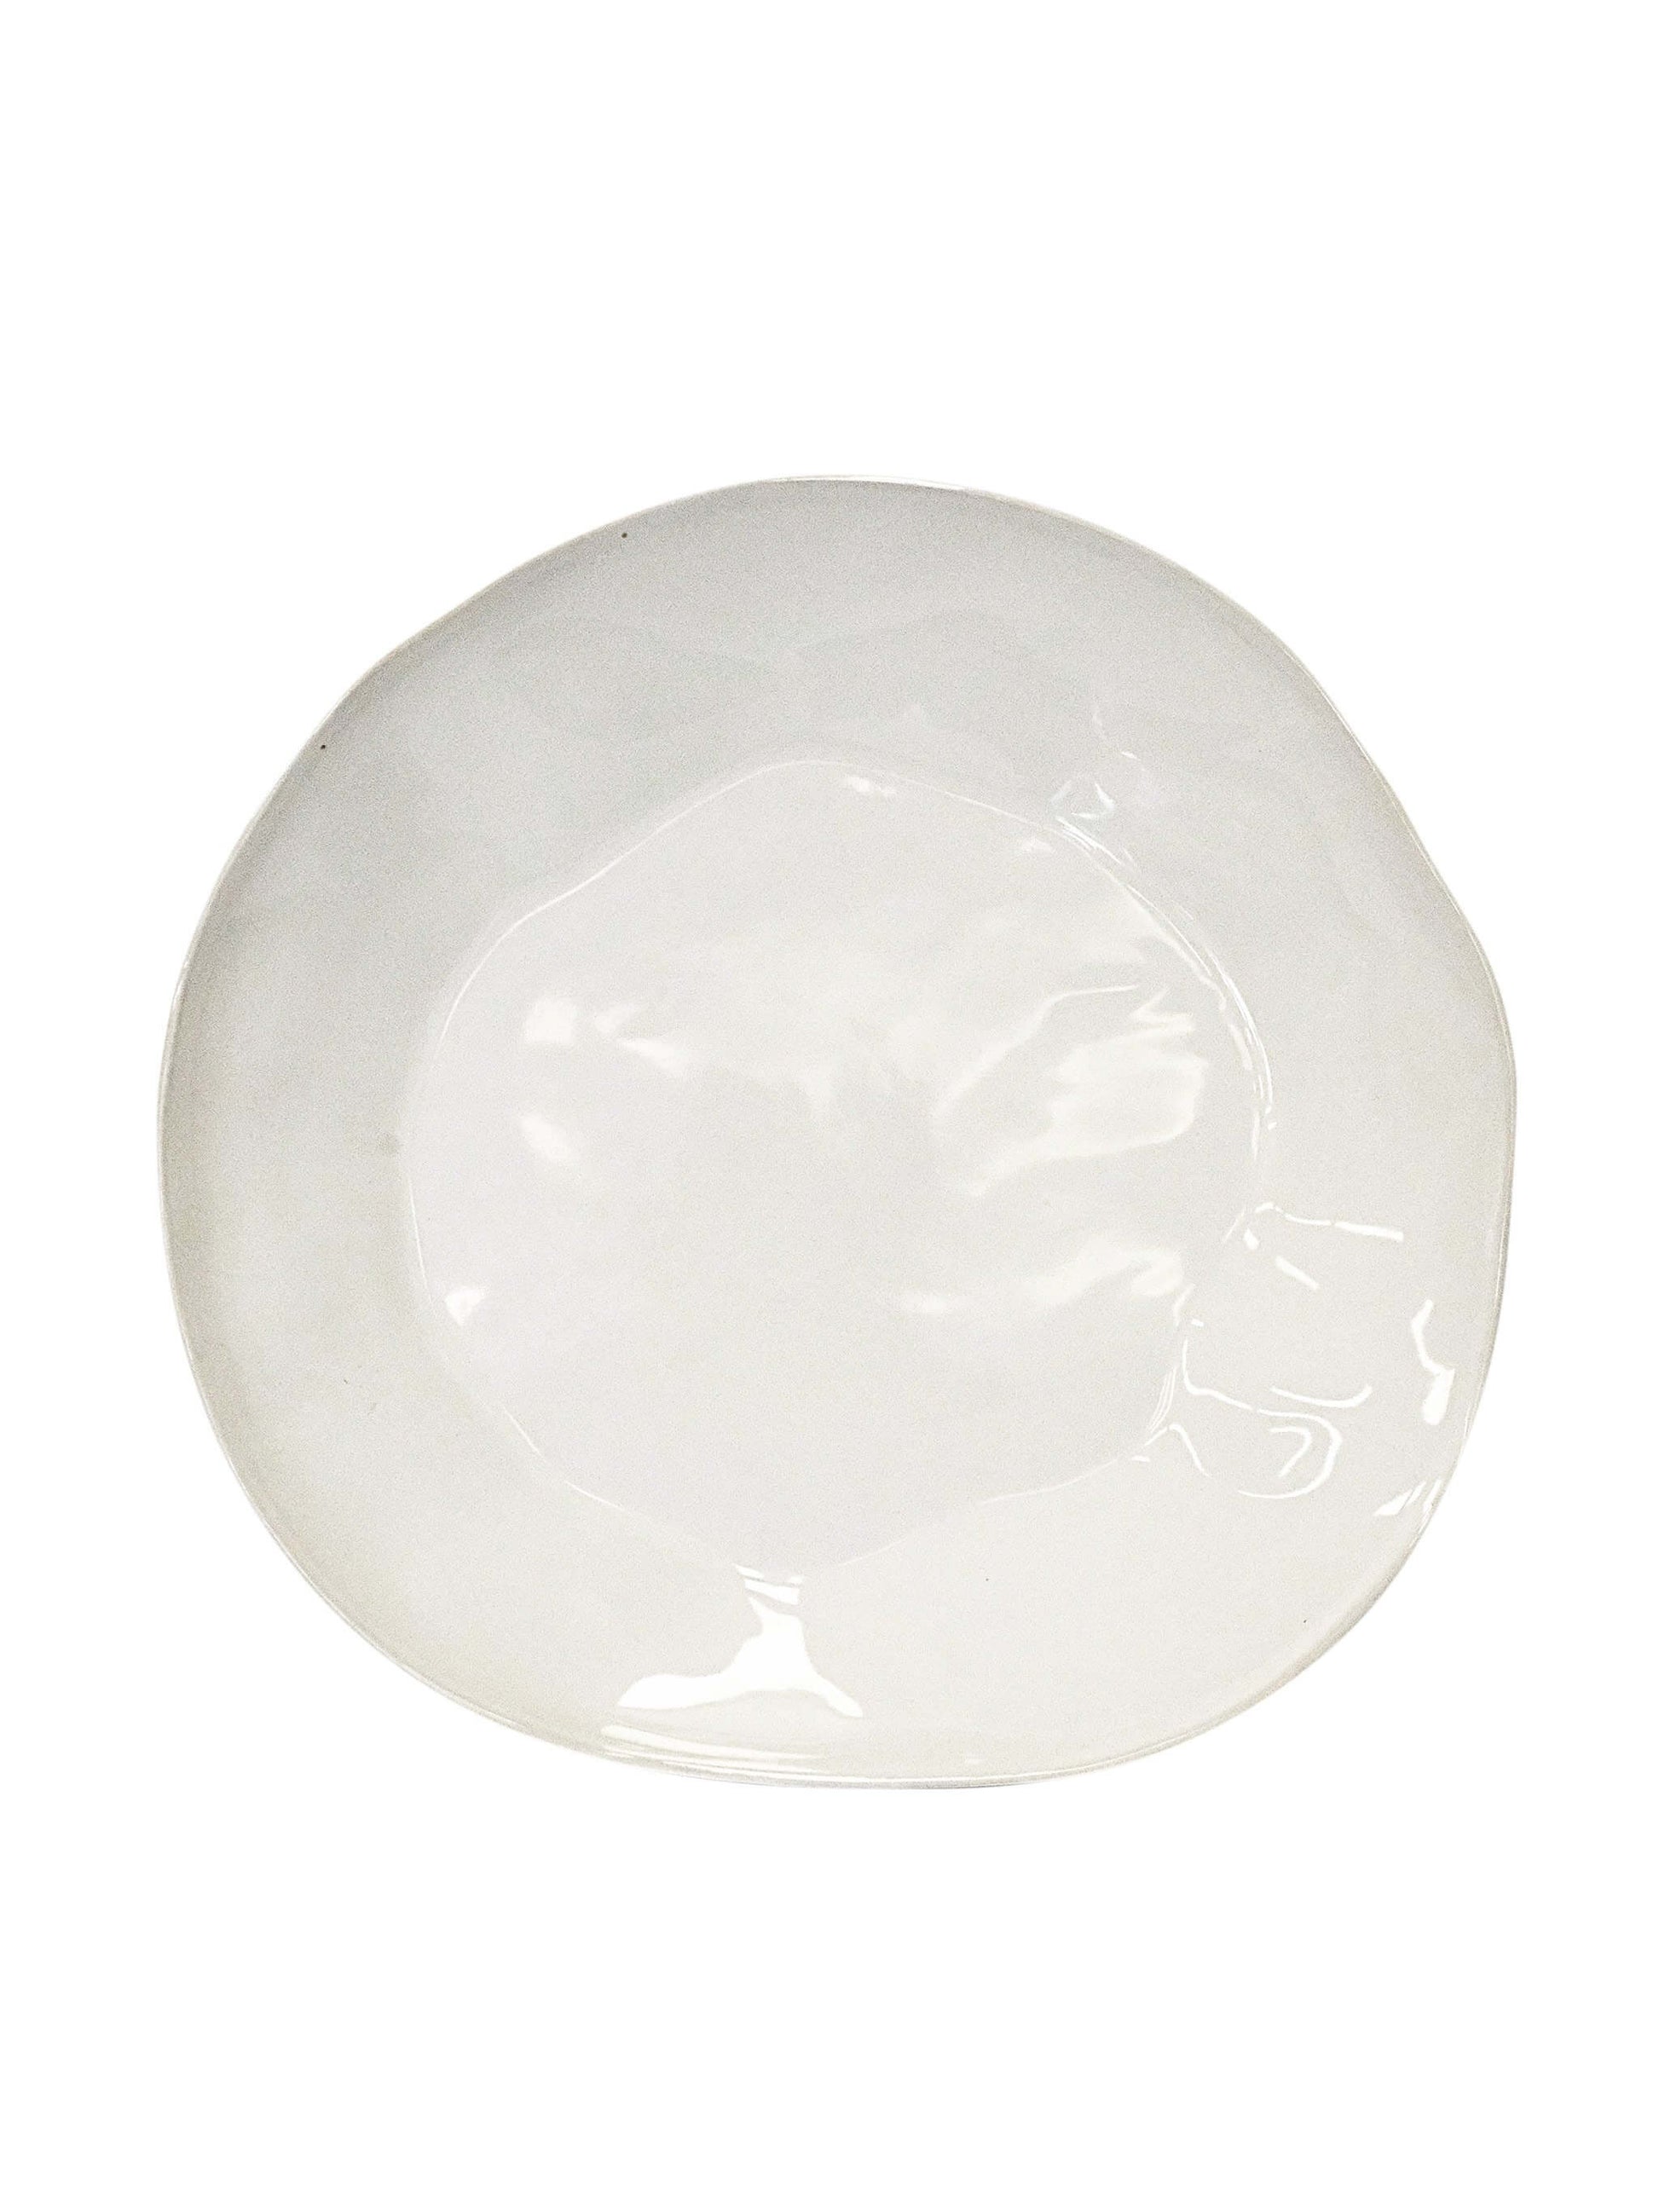 Flax Large Dinner Plate 26cm White - Shop Charlies Interiors